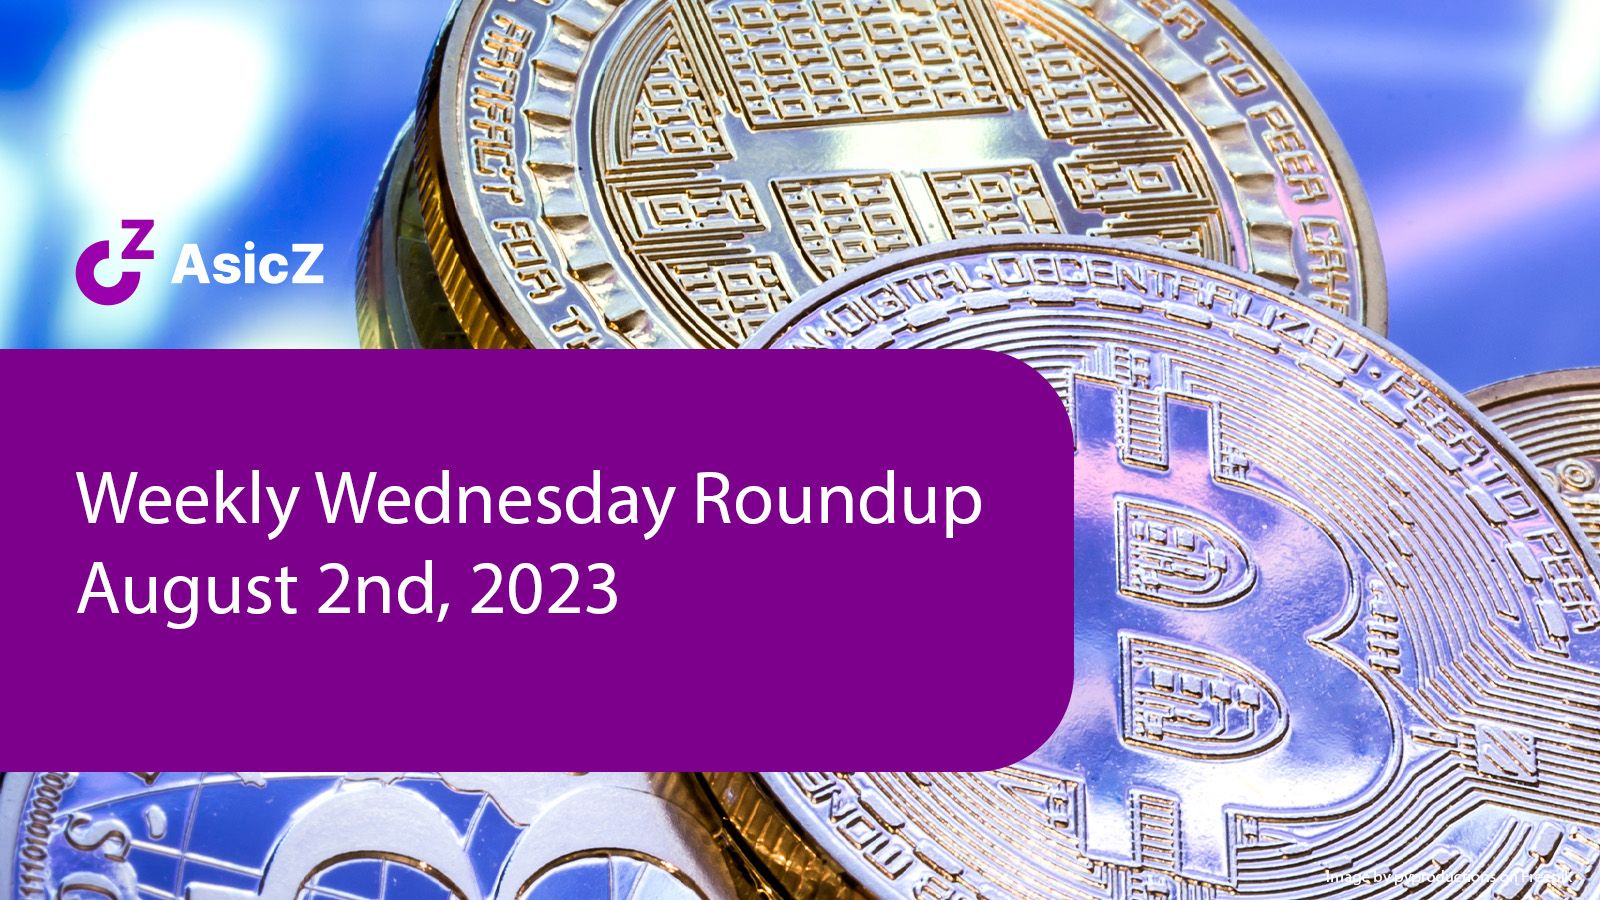 AsicZ Weekly Wednesday Roundup – August 2nd, 2023